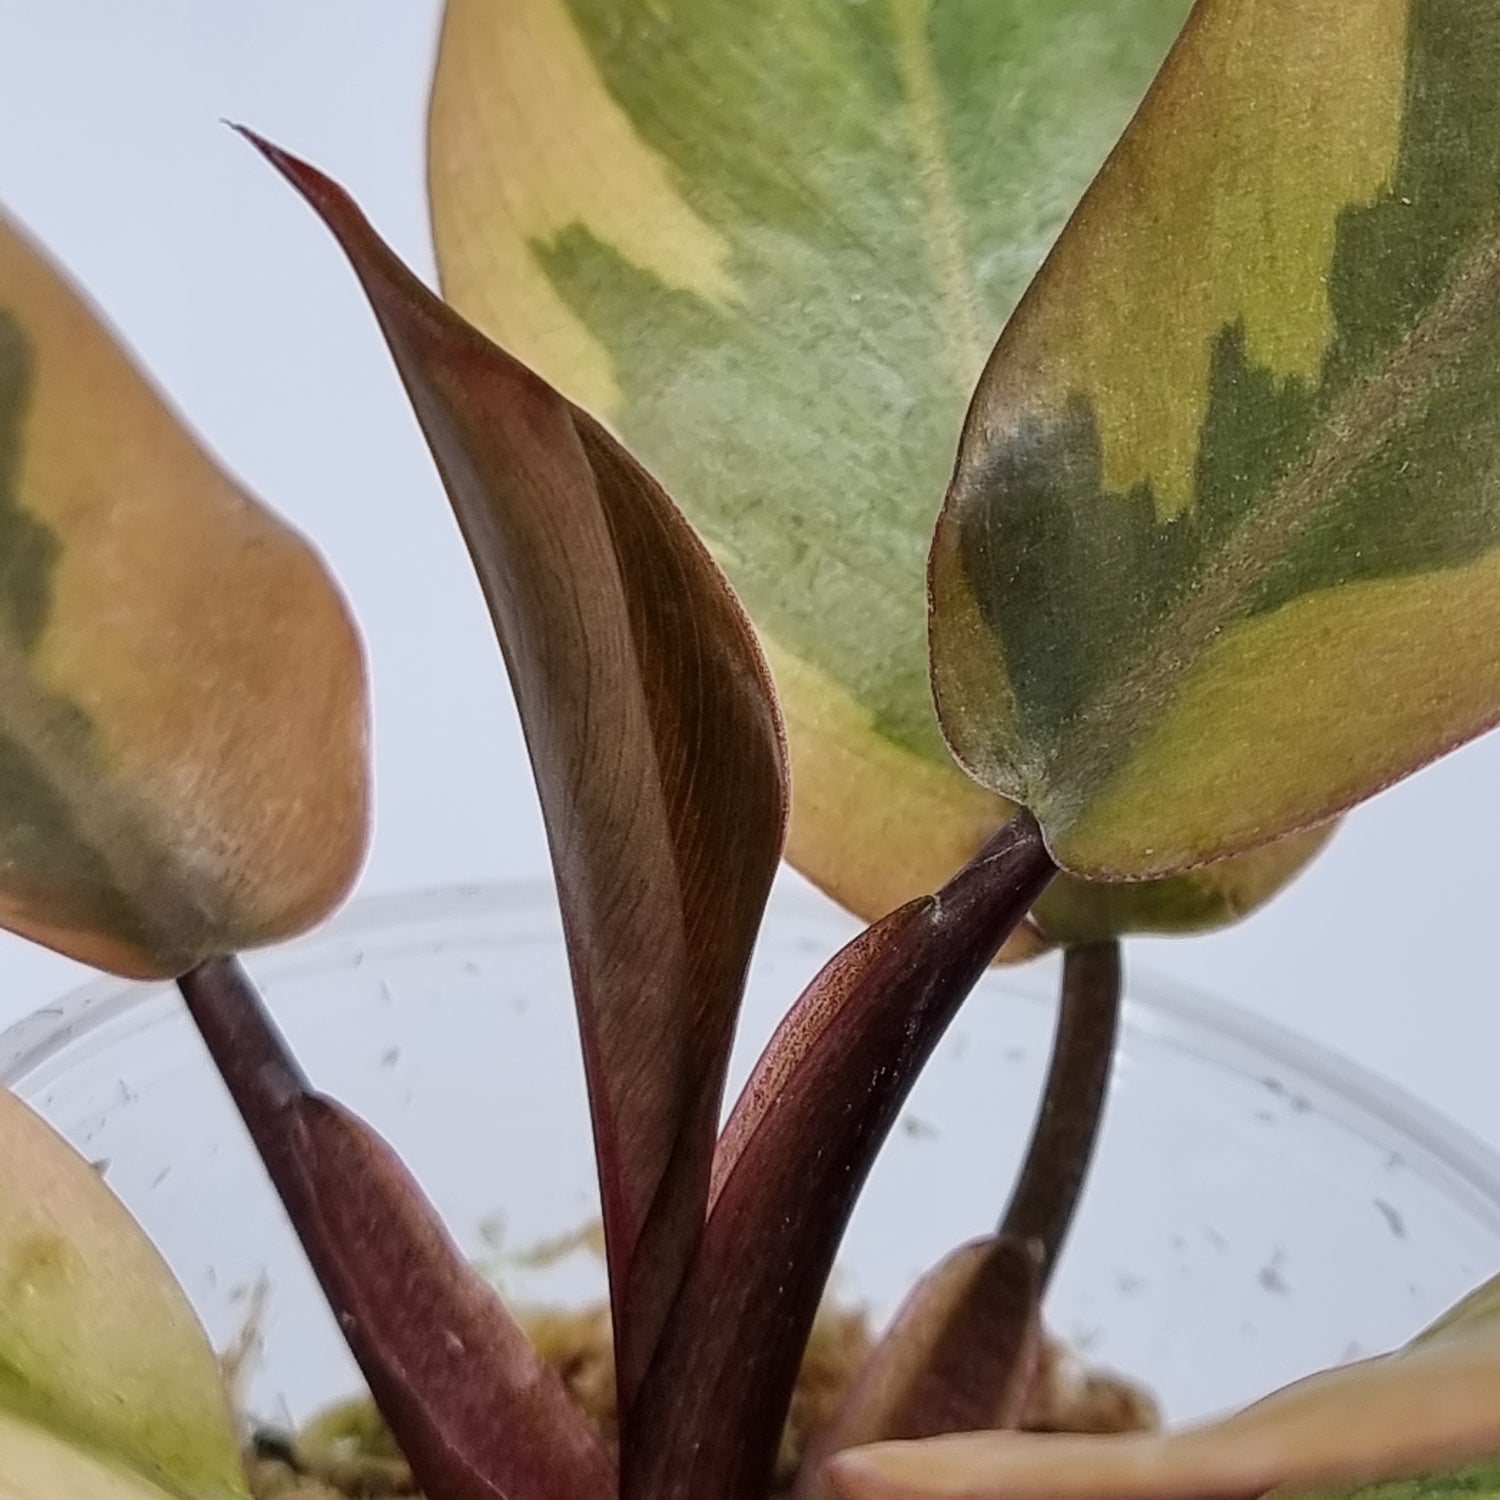 rare Variegated Philodendron black cardinal for sale in Perth Australia